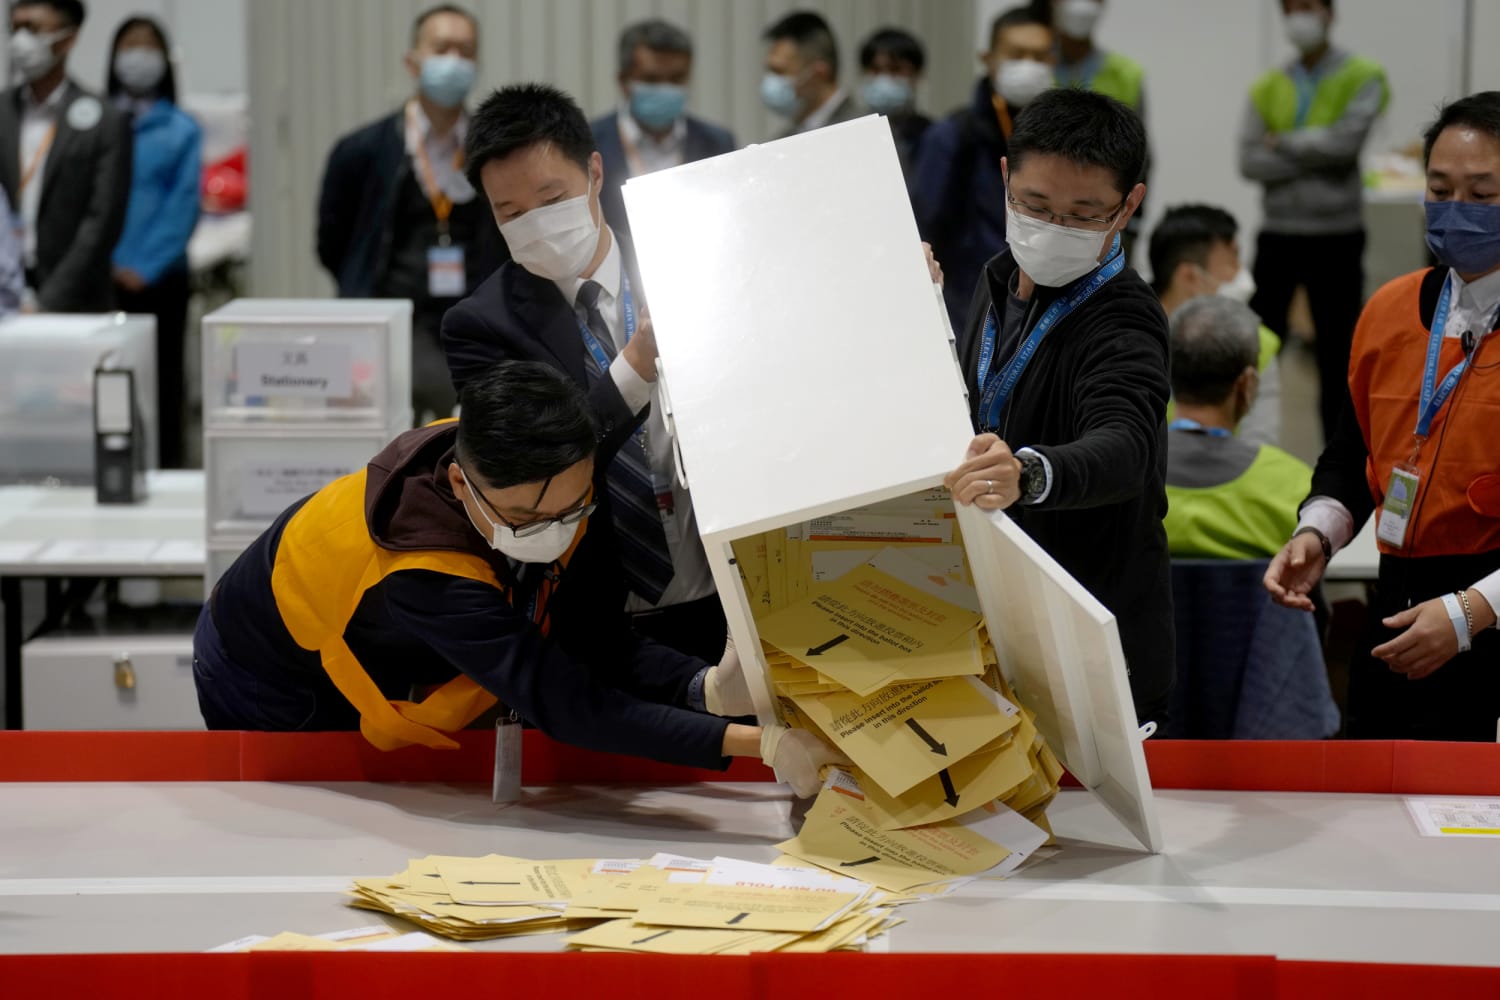 Beijing imposed a ‘patriots-only’ election on Hong Kong. Voter turnout hit record lows.